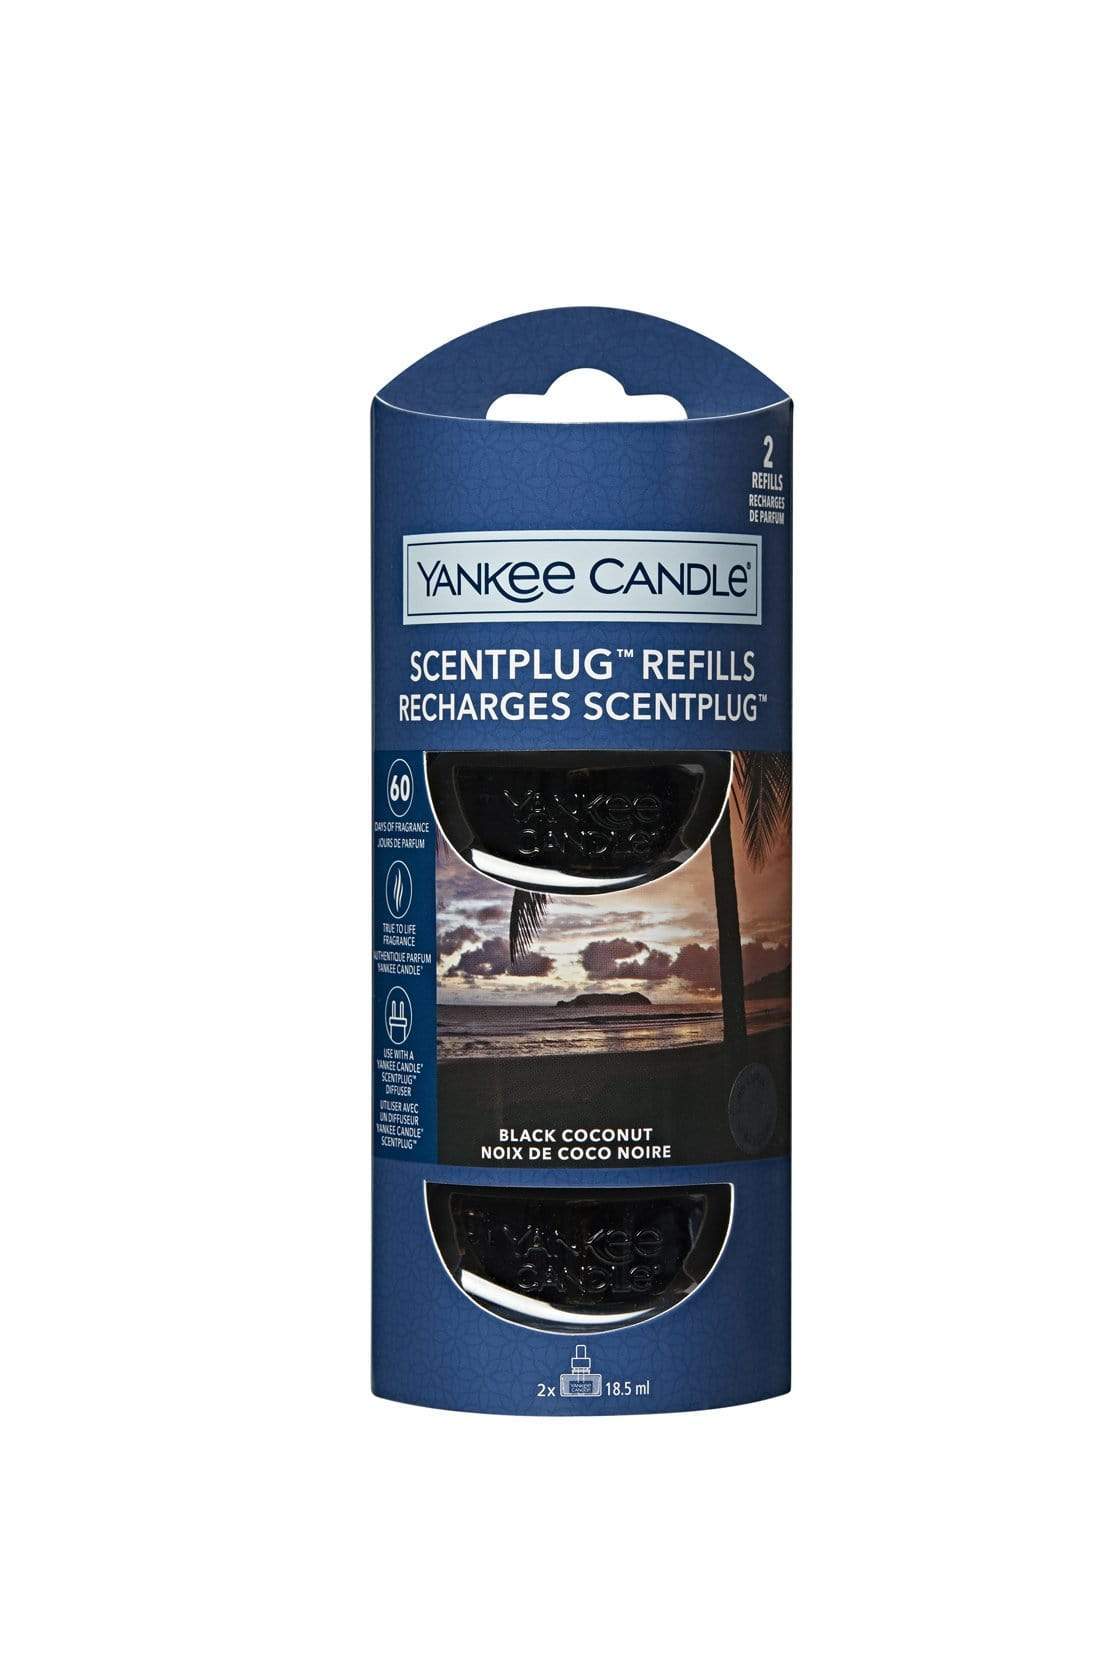 Yankee Candle Plug In Refill Yankee Candle Scentplug Refill Twin Pack - Black Coconut